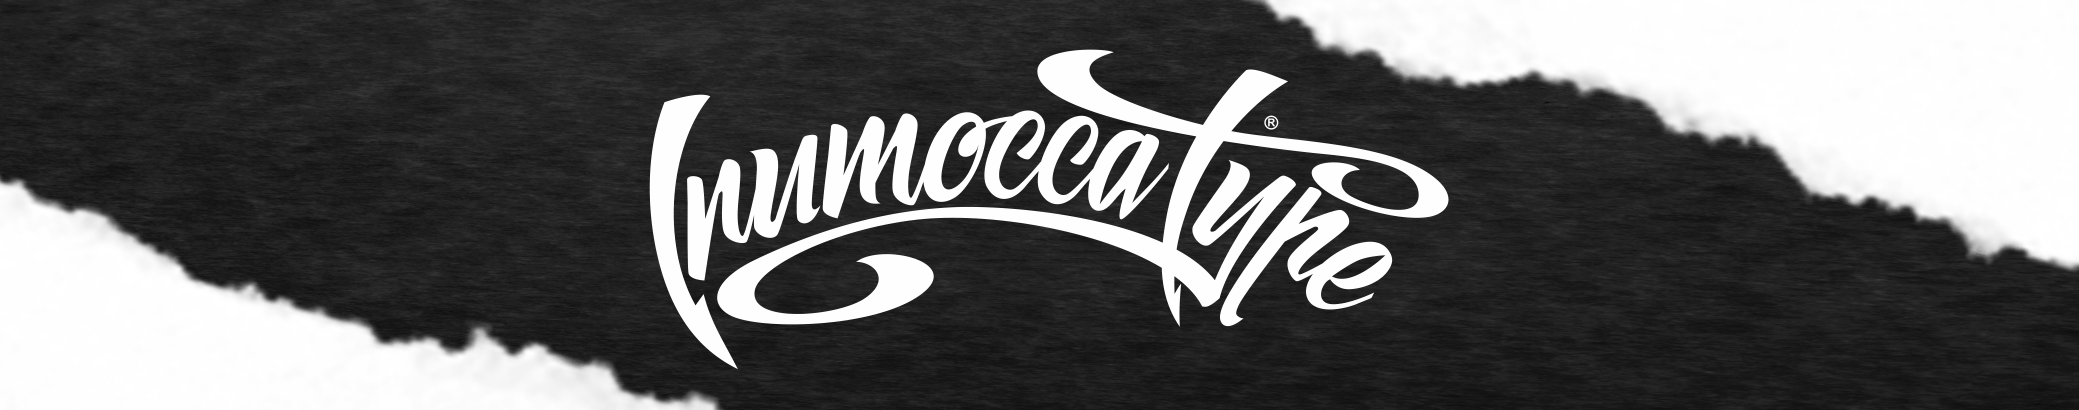 inumocca type's profile banner